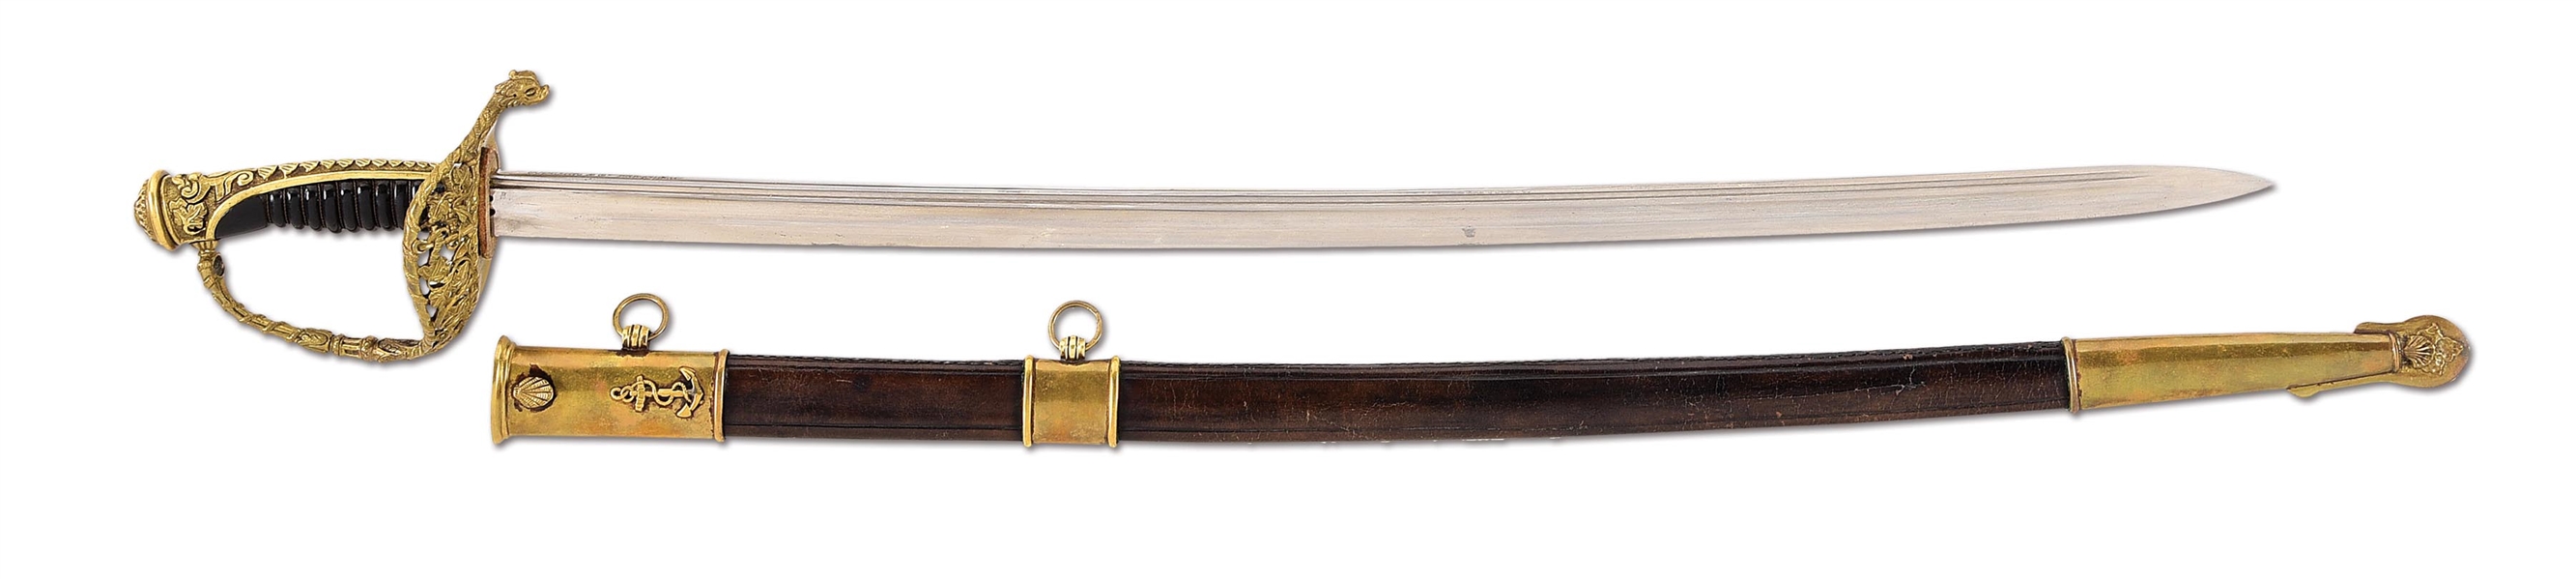 FRENCH M1854 NAVAL OFFICERS SWORD.